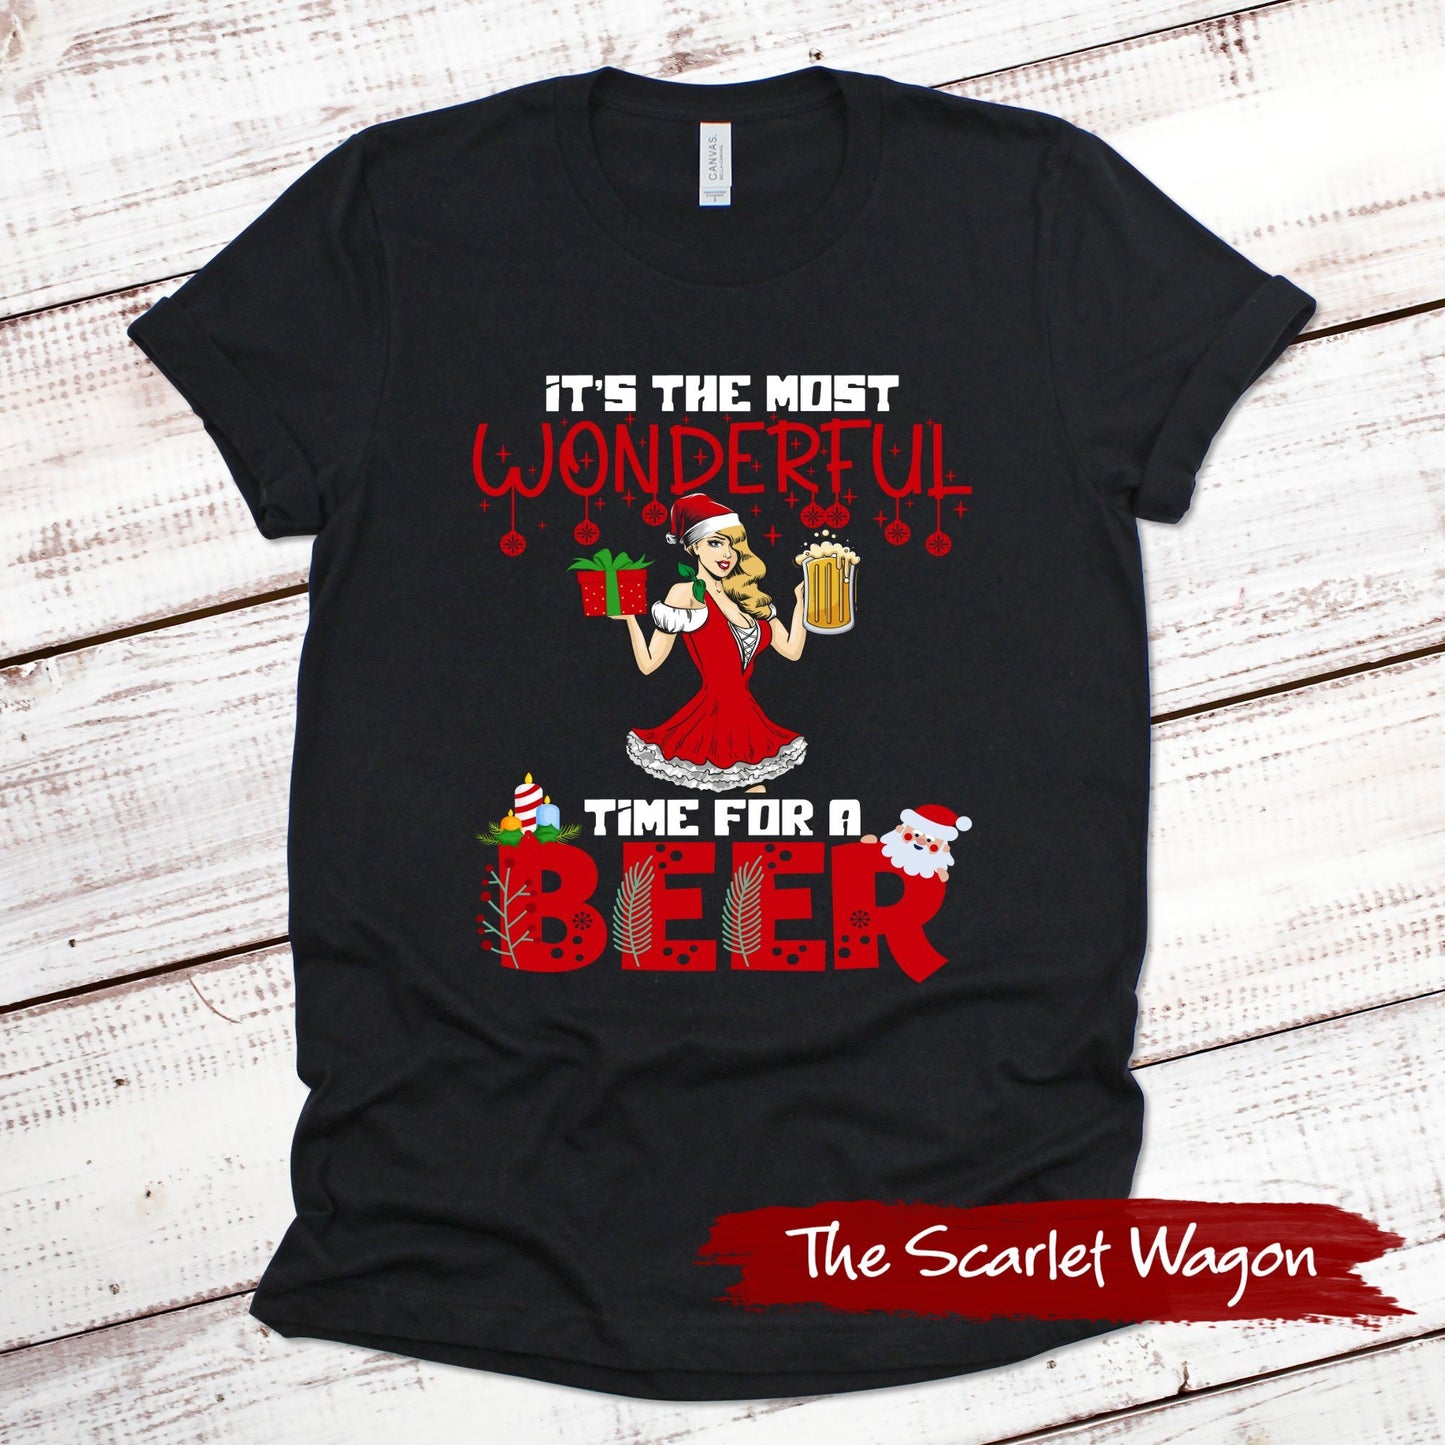 Most Wonderful Time for a Beer Christmas Shirt Scarlet Wagon Black XS 